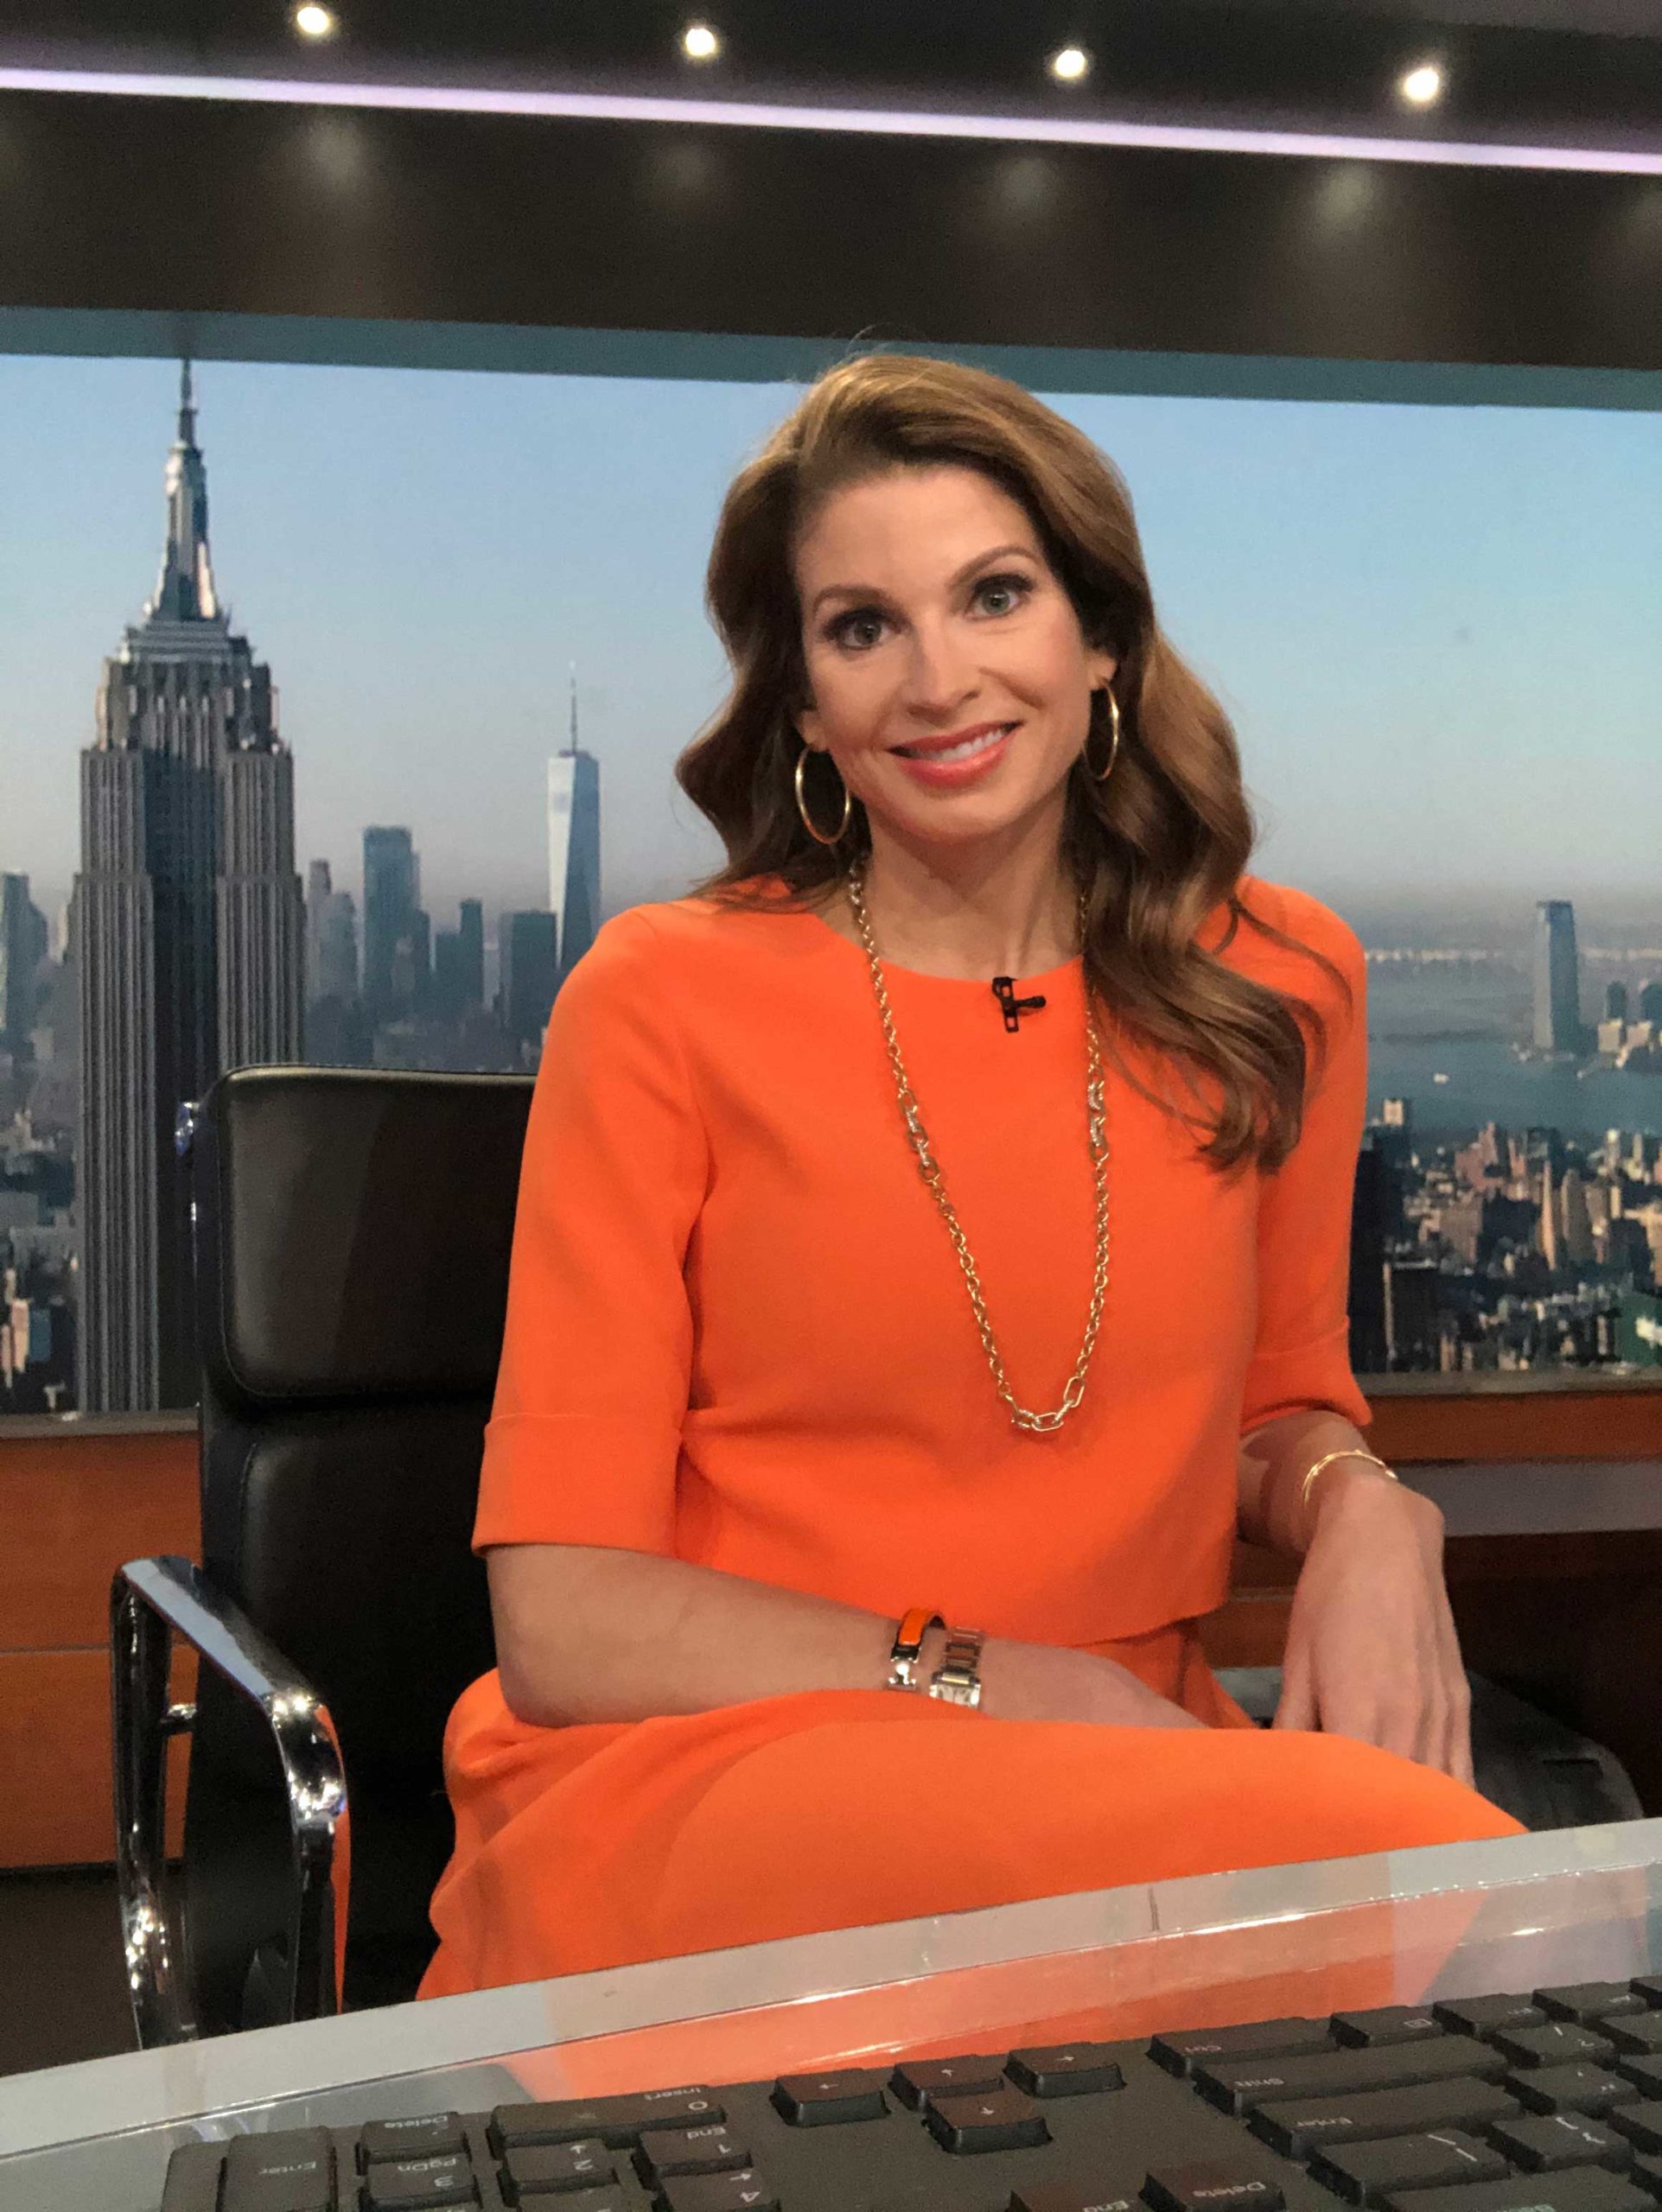 Jen on set, sitting behind the anchor desk, smiling into camera in an orange dress.